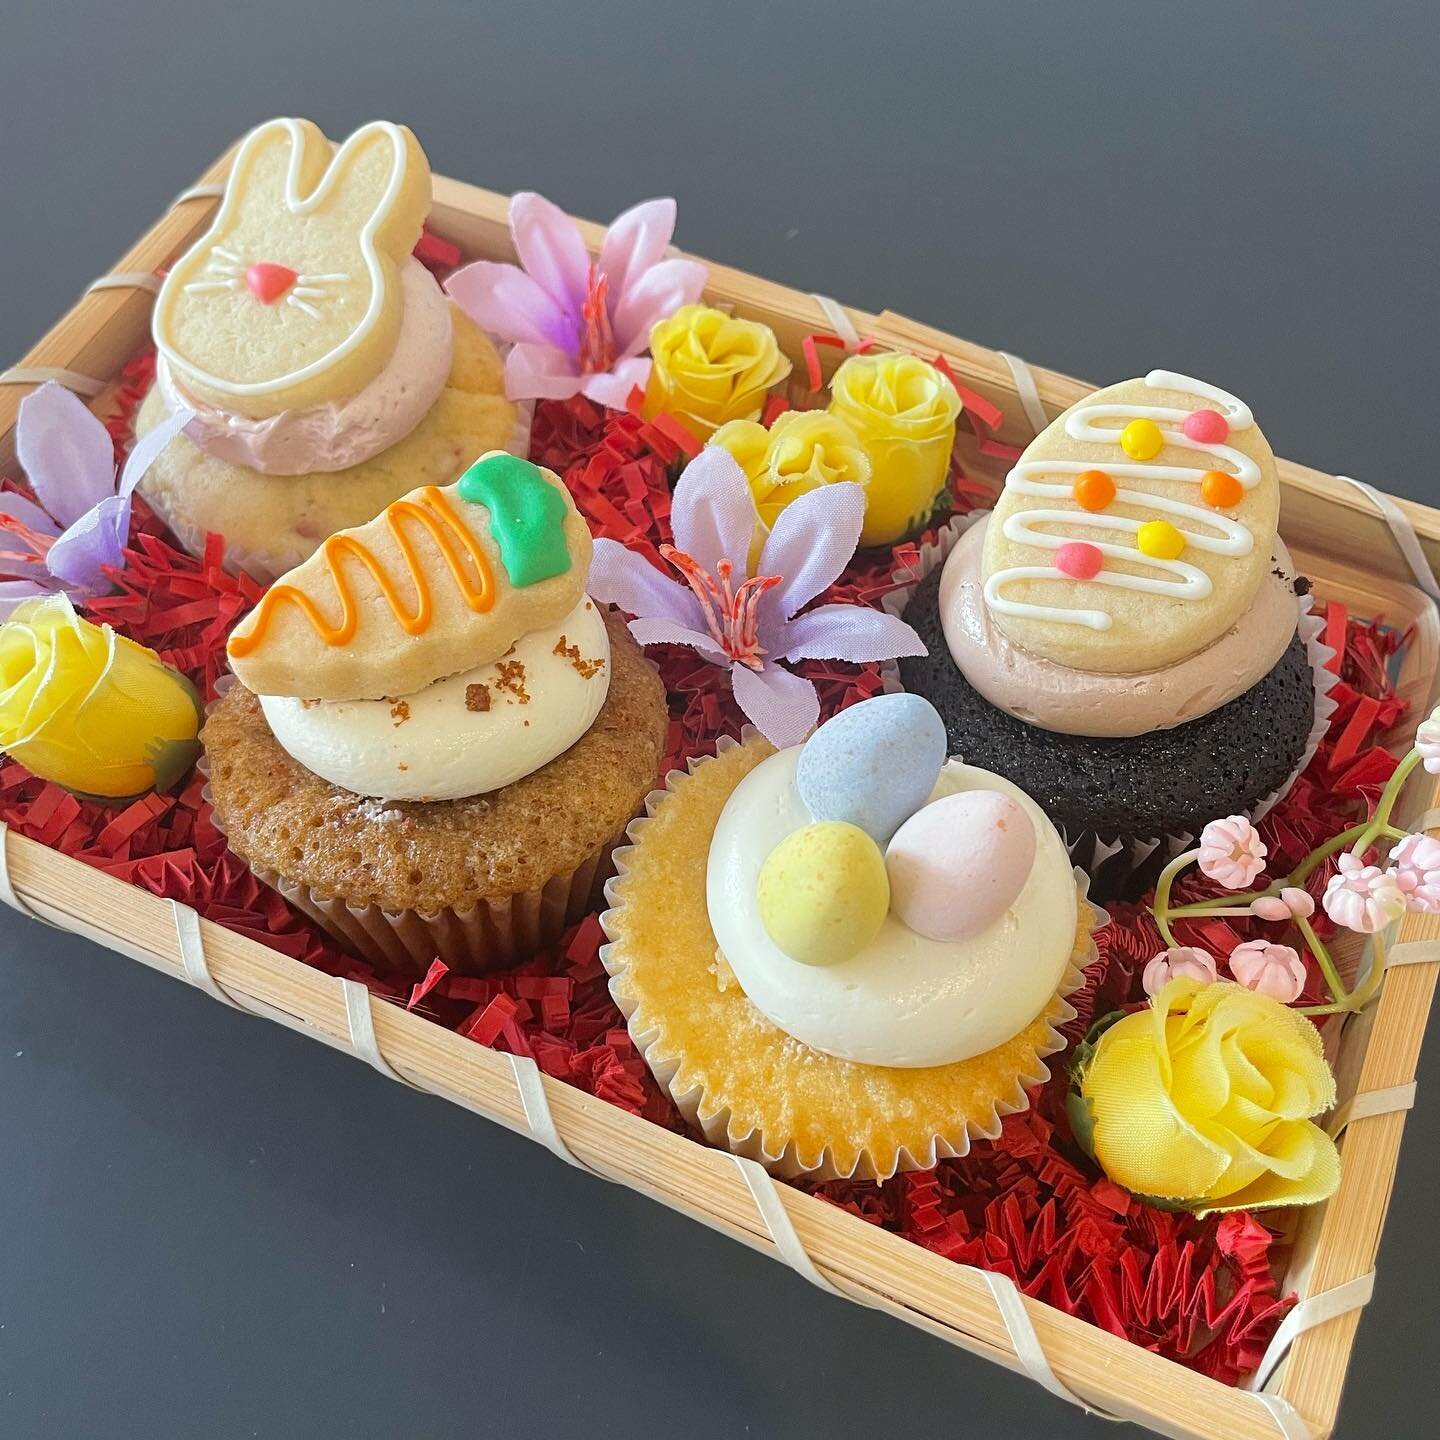 Get ready for easter by picking up some decorated cupcake and cookies! 🐰 Choose a decoration for your cupcakes of cookies or Cadbury eggs! And grab some extra decorated cookies to share with all of your loved ones in boxes of 1/4 lb, 1/2 lb, 1 lb, o